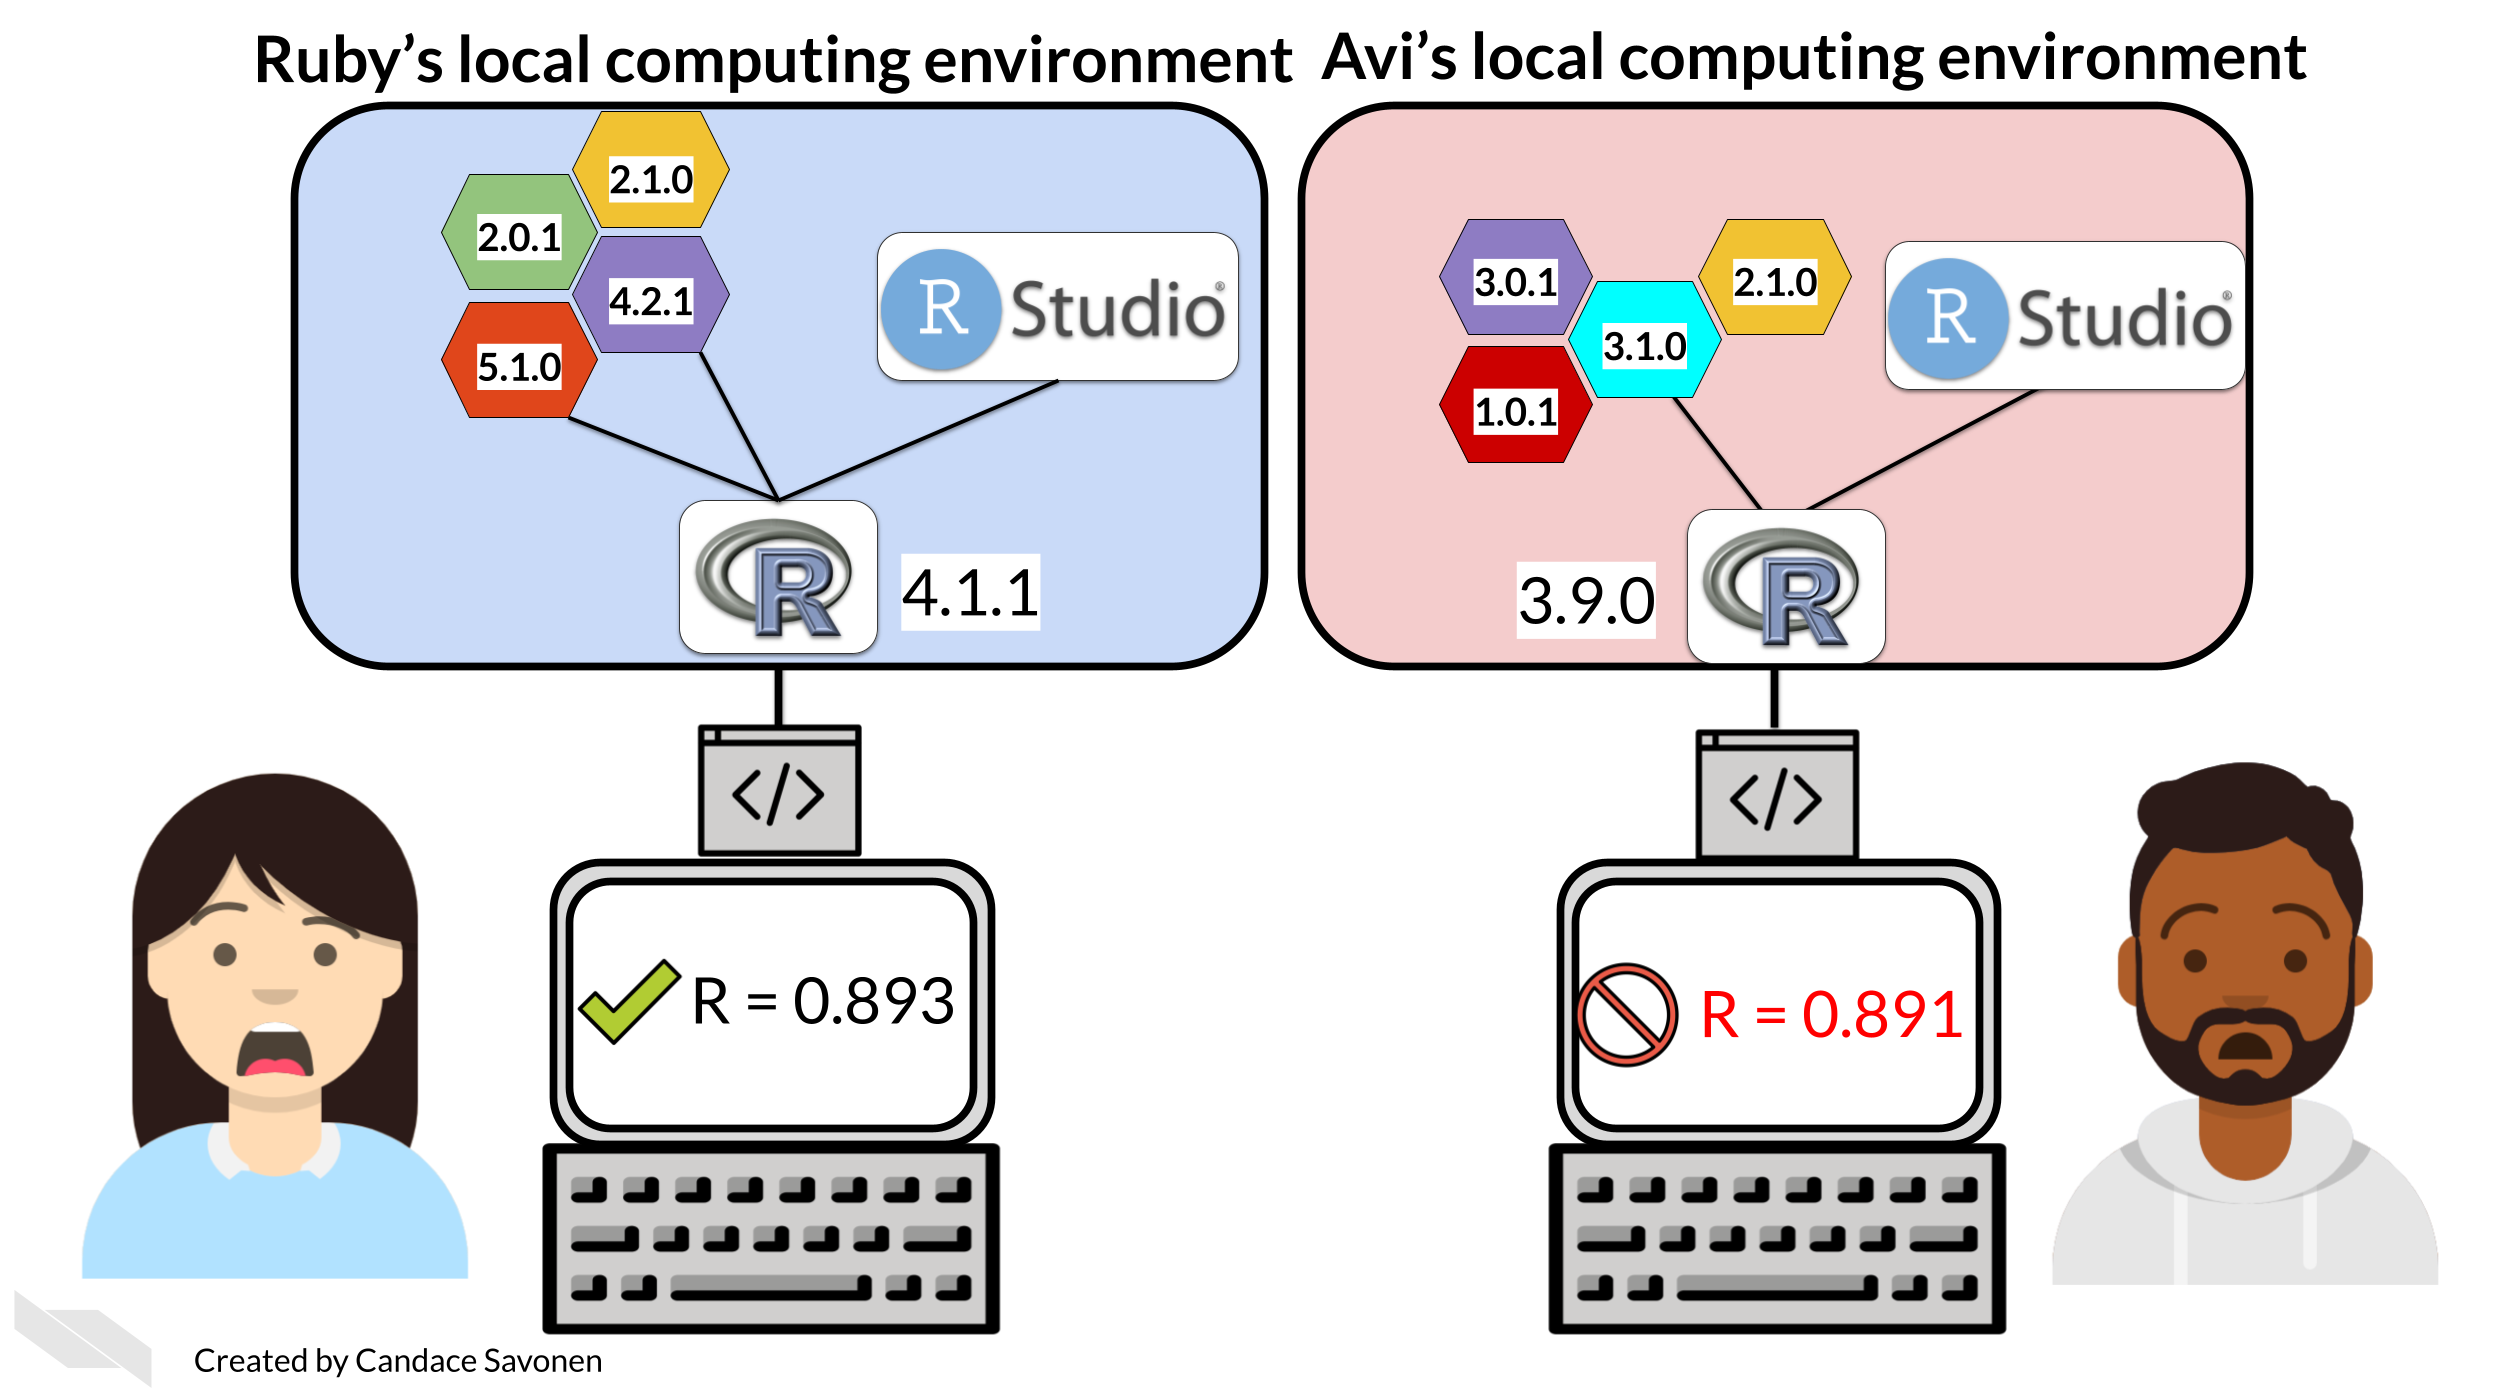 A cartoon image. On one side of a screen, a computer labeled "Ruby's local computing environment" has images of the R and R Studio logos, and bubbles with several different version numbers. On the right side, an image of a computer labeled "Avi's local computing environment" also has the R and R Studio logos, with bubbles that have different version numbers. A drawing of a person making a distressed face is on each side of the image.   